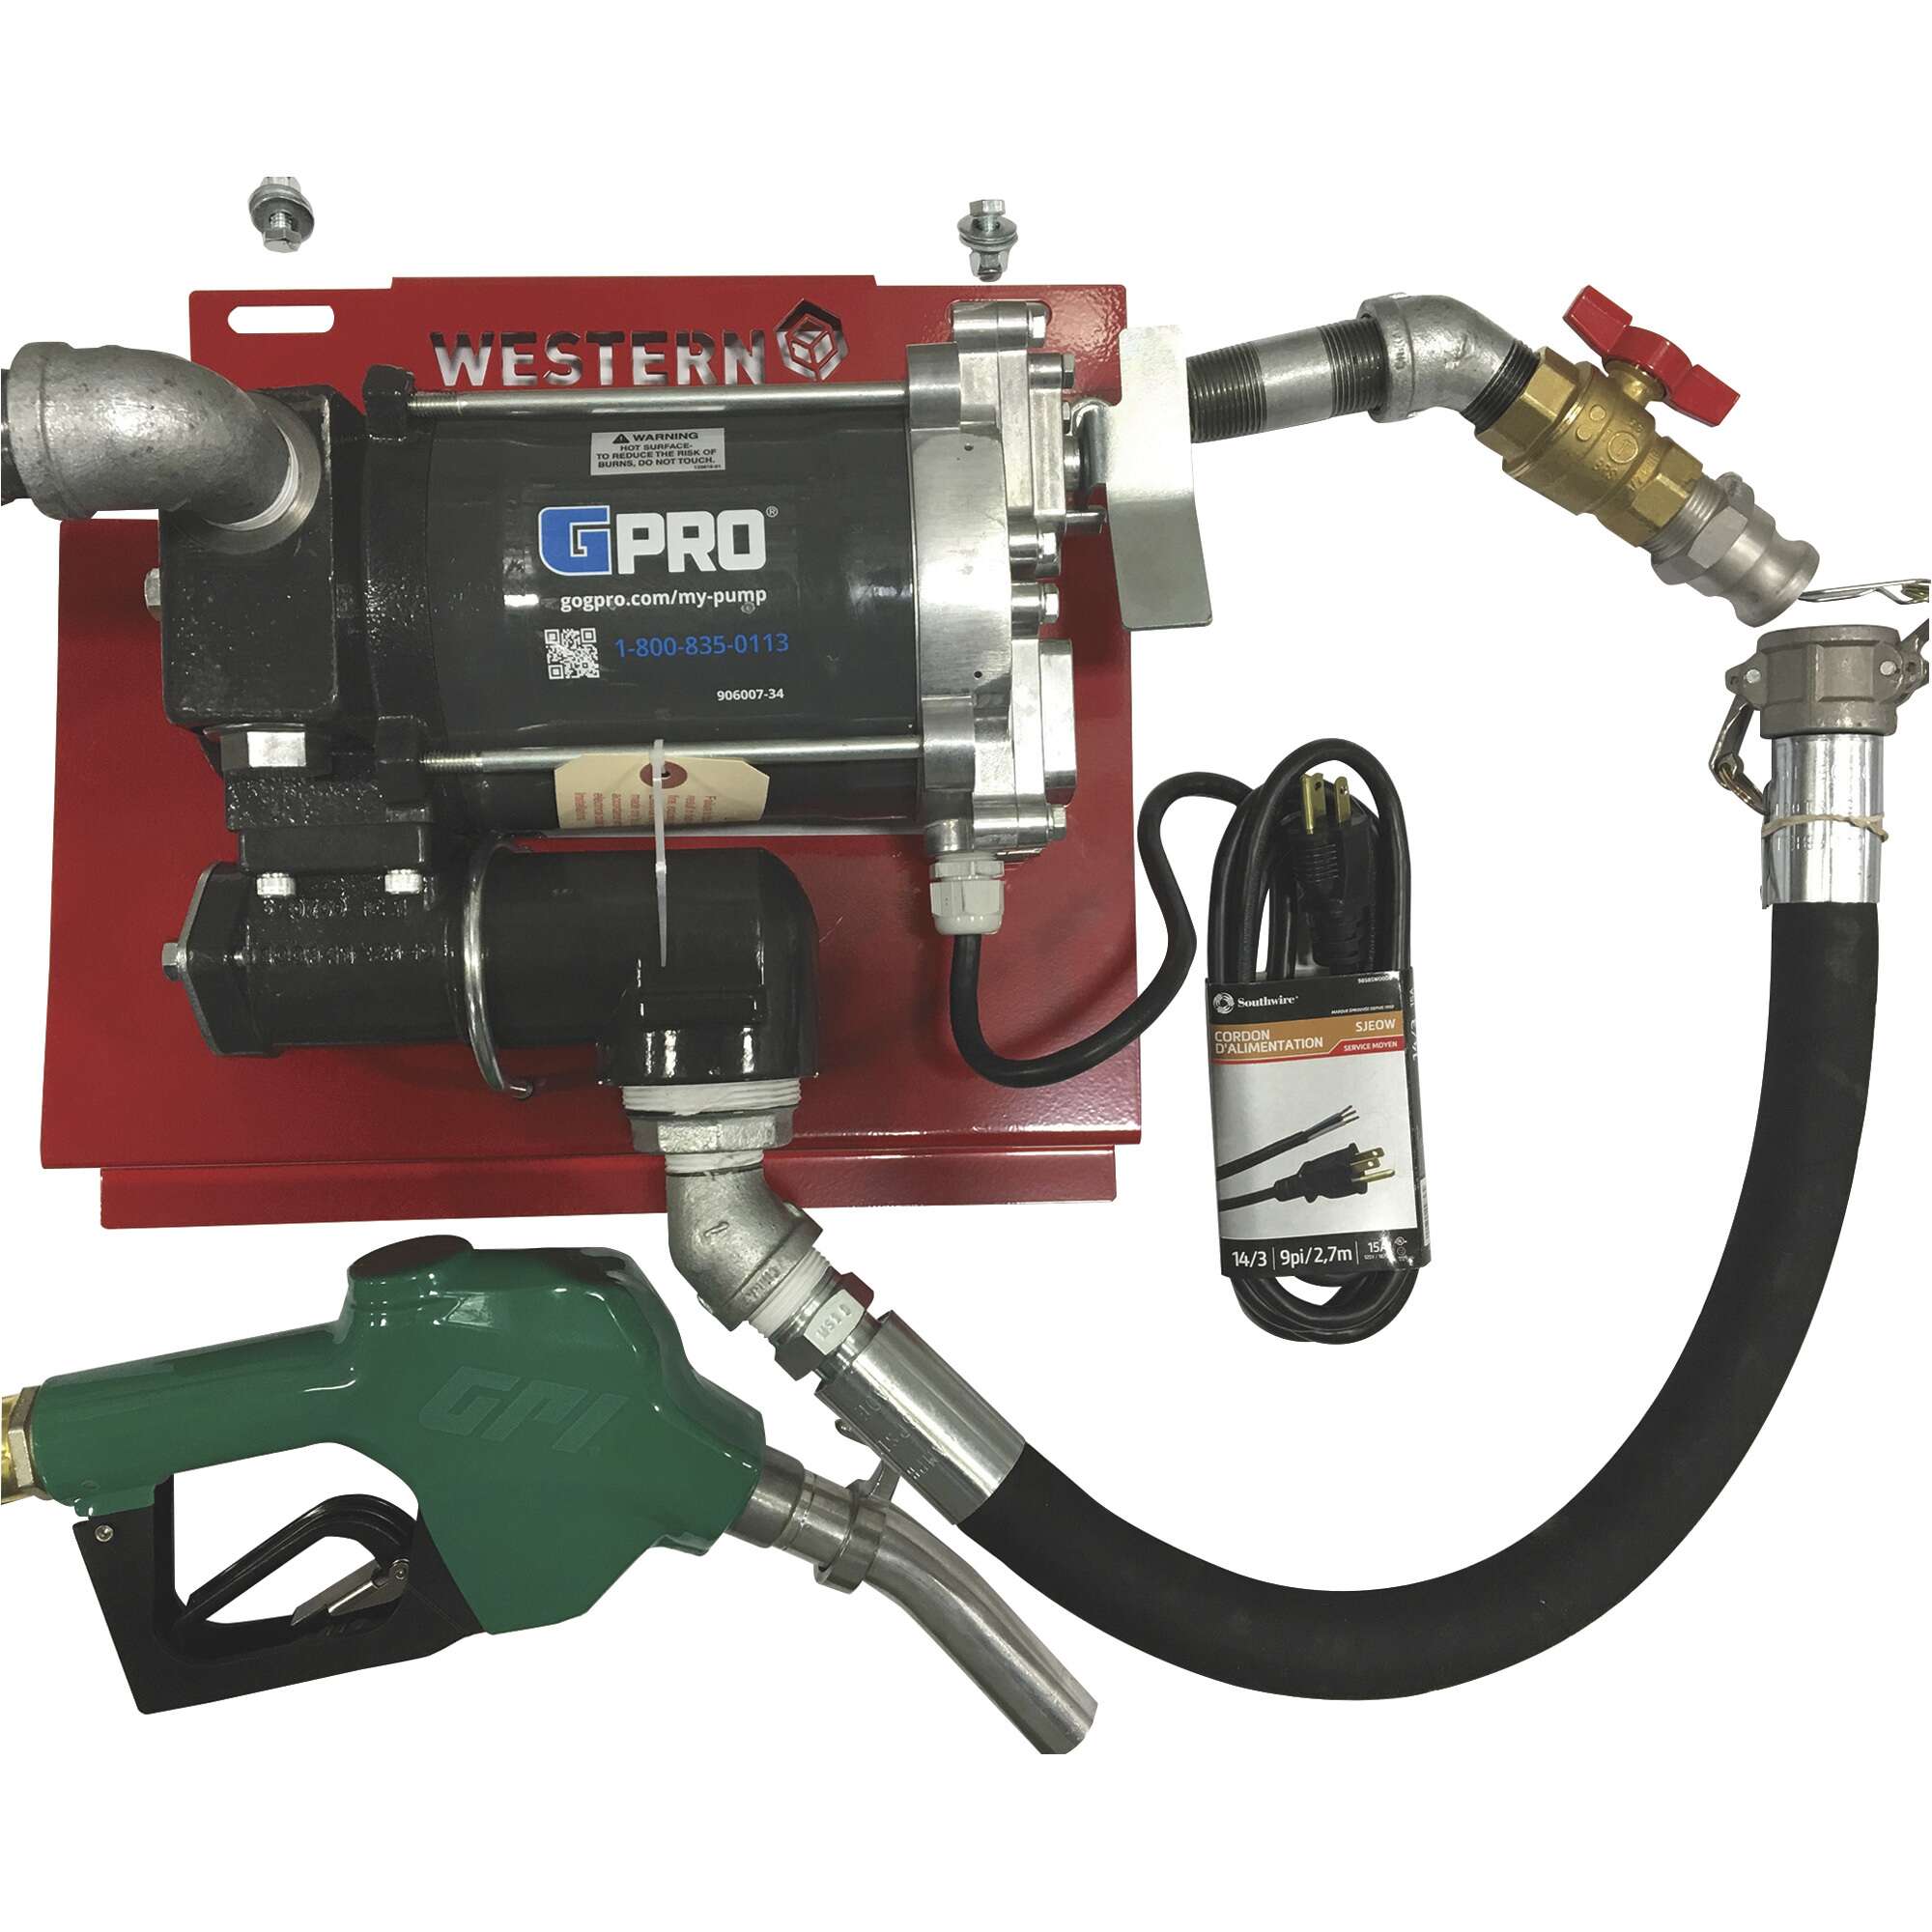 https://primadian.com/wp-content/uploads/2022/06/Western-Global-Deluxe-Fuel-Transfer-Pump-Kit-115-Volt-AC-20-GPM-Automatic-Nozzle-2000x2000.jpg